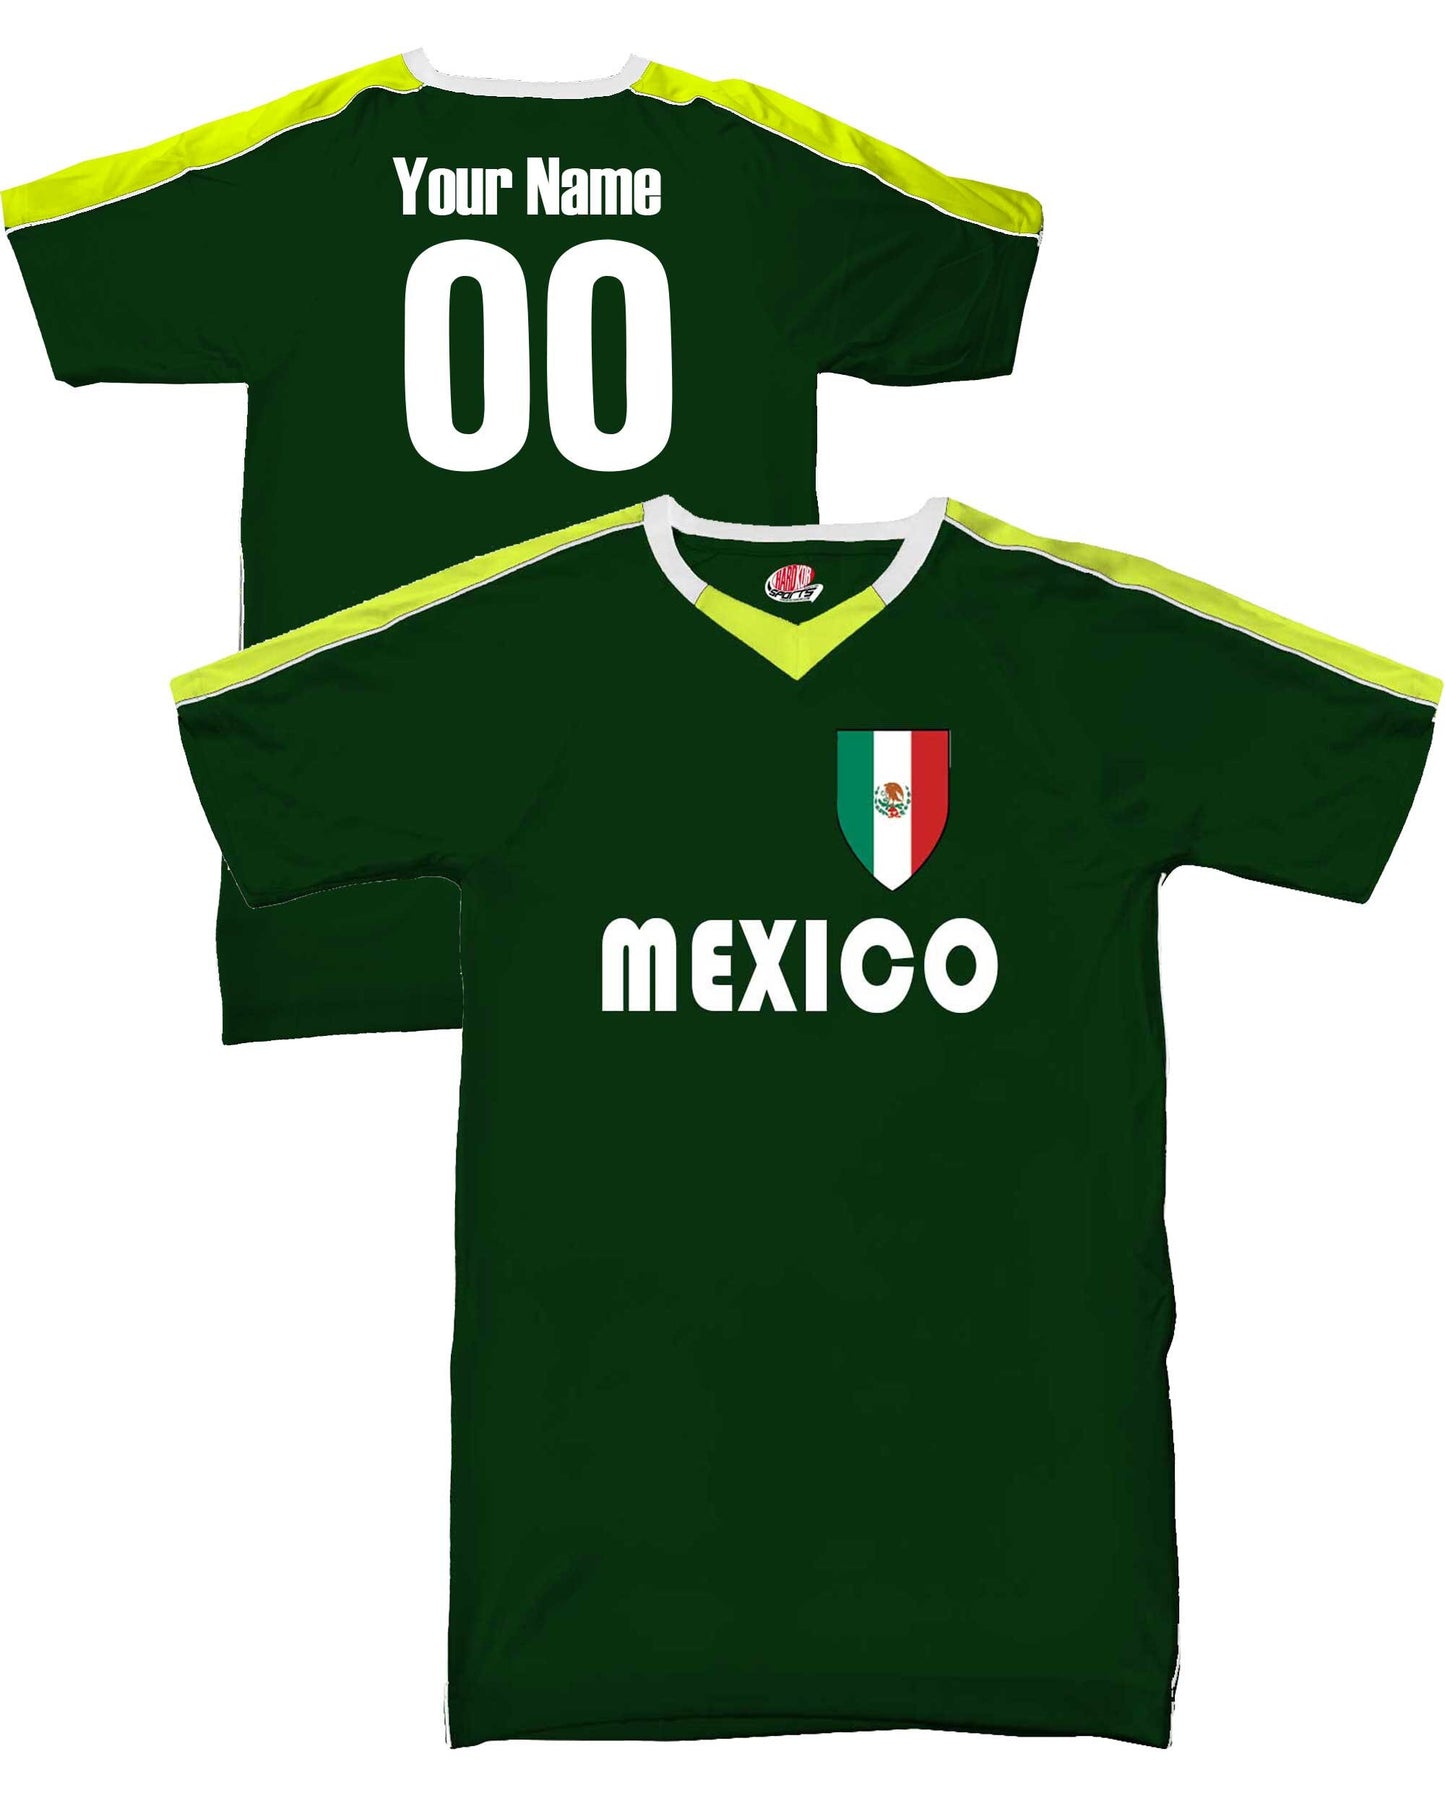 Custom Mexico Soccer Jersey with Mexican Flag Shield Design | Personalized with Your Name and Number in Your choice of colors